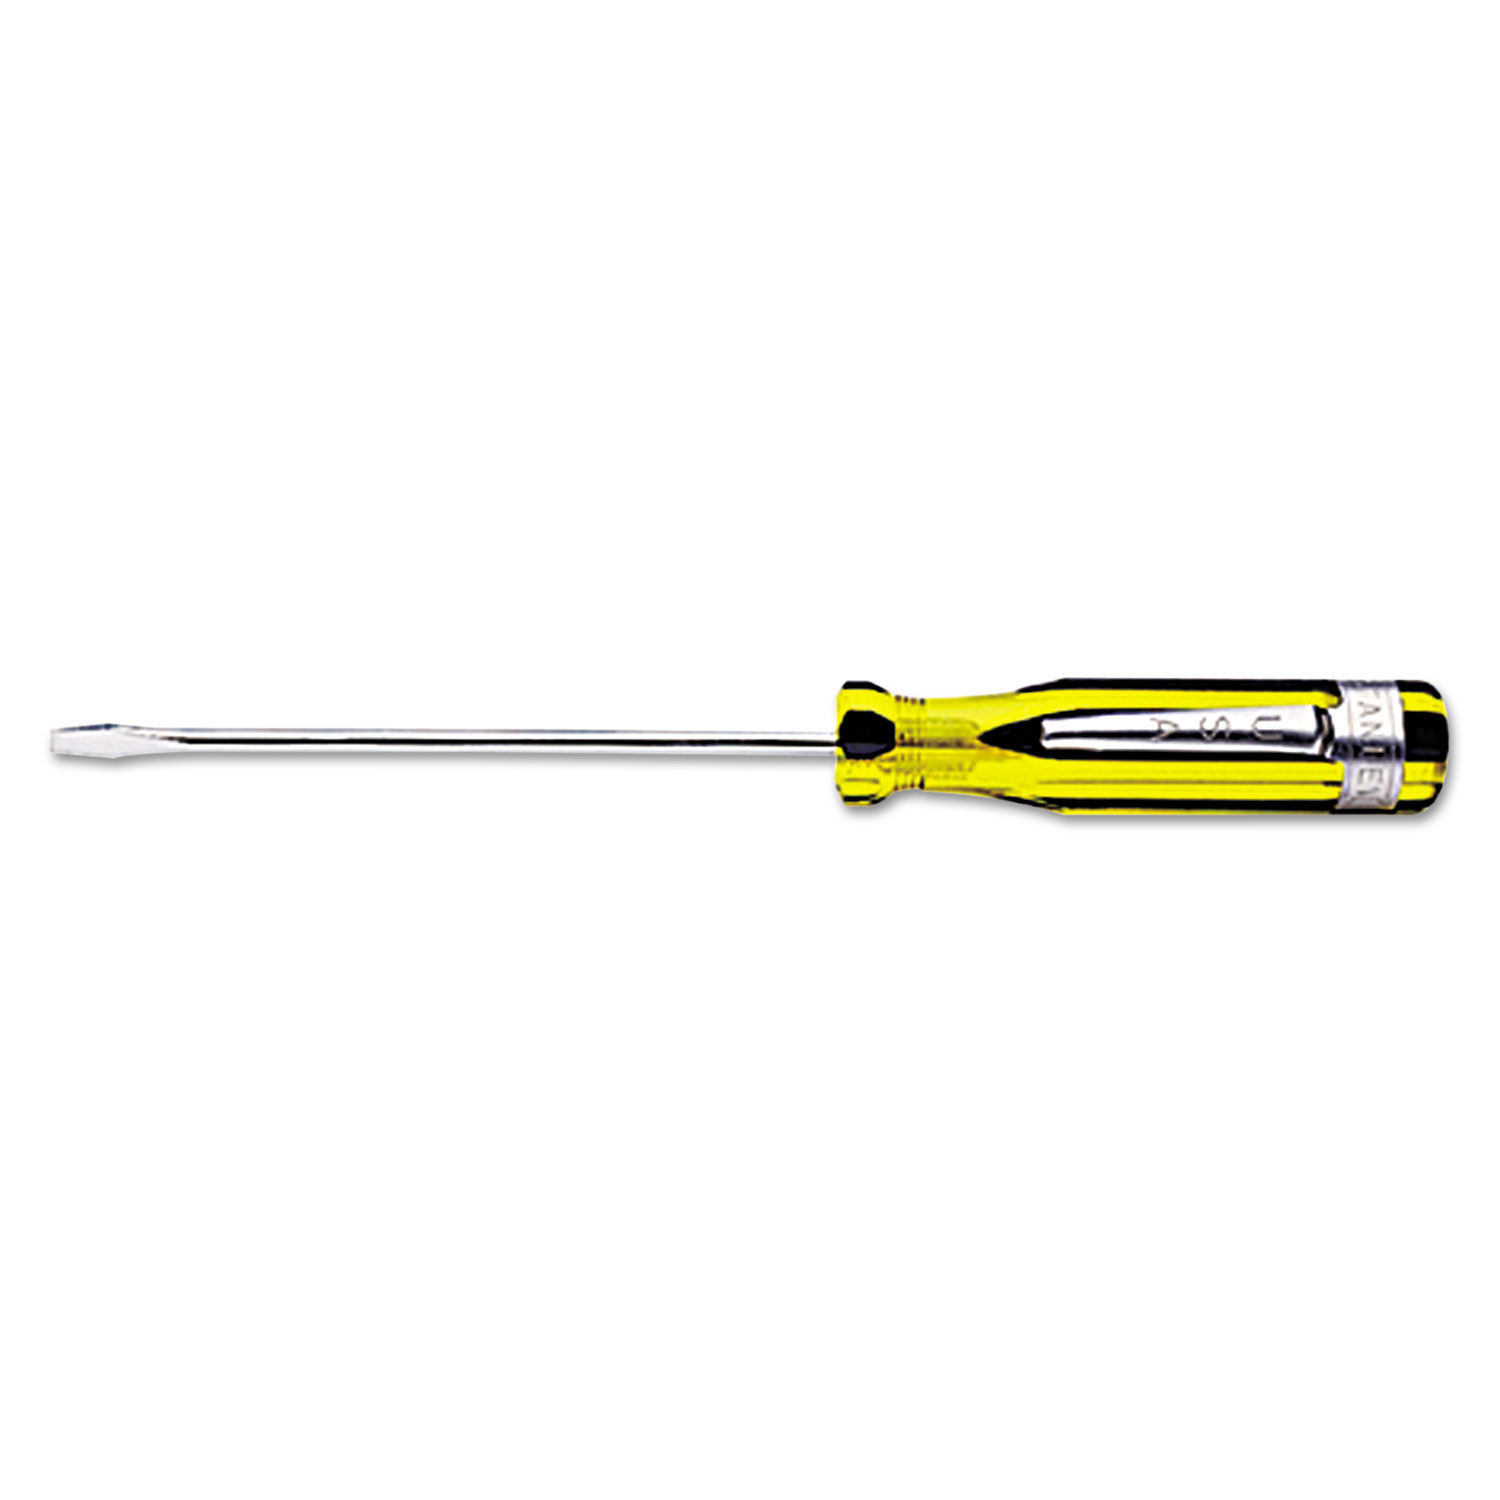 100 Plus Slotted Pocket Screwdriver, 3/32in, 5 3/8in Long